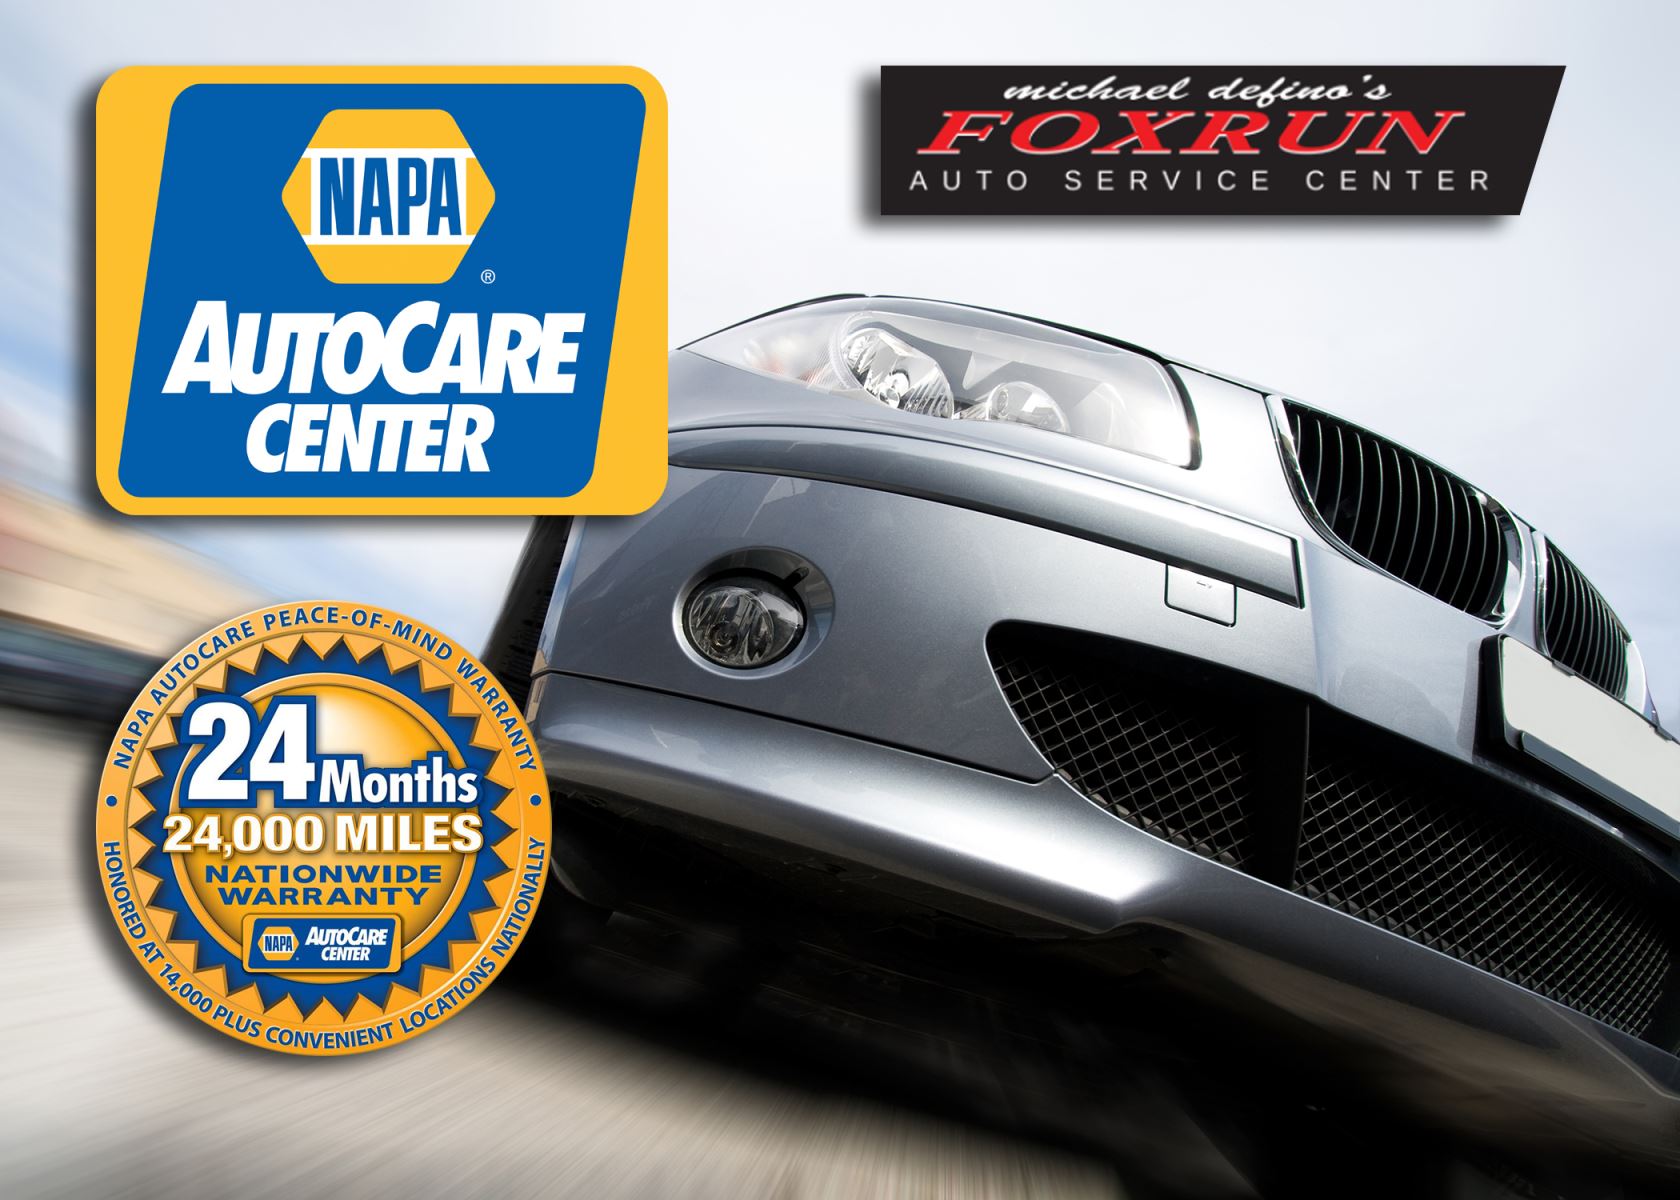 Local Customer Has Trusted Fox Run Auto for More Than 10 Years!